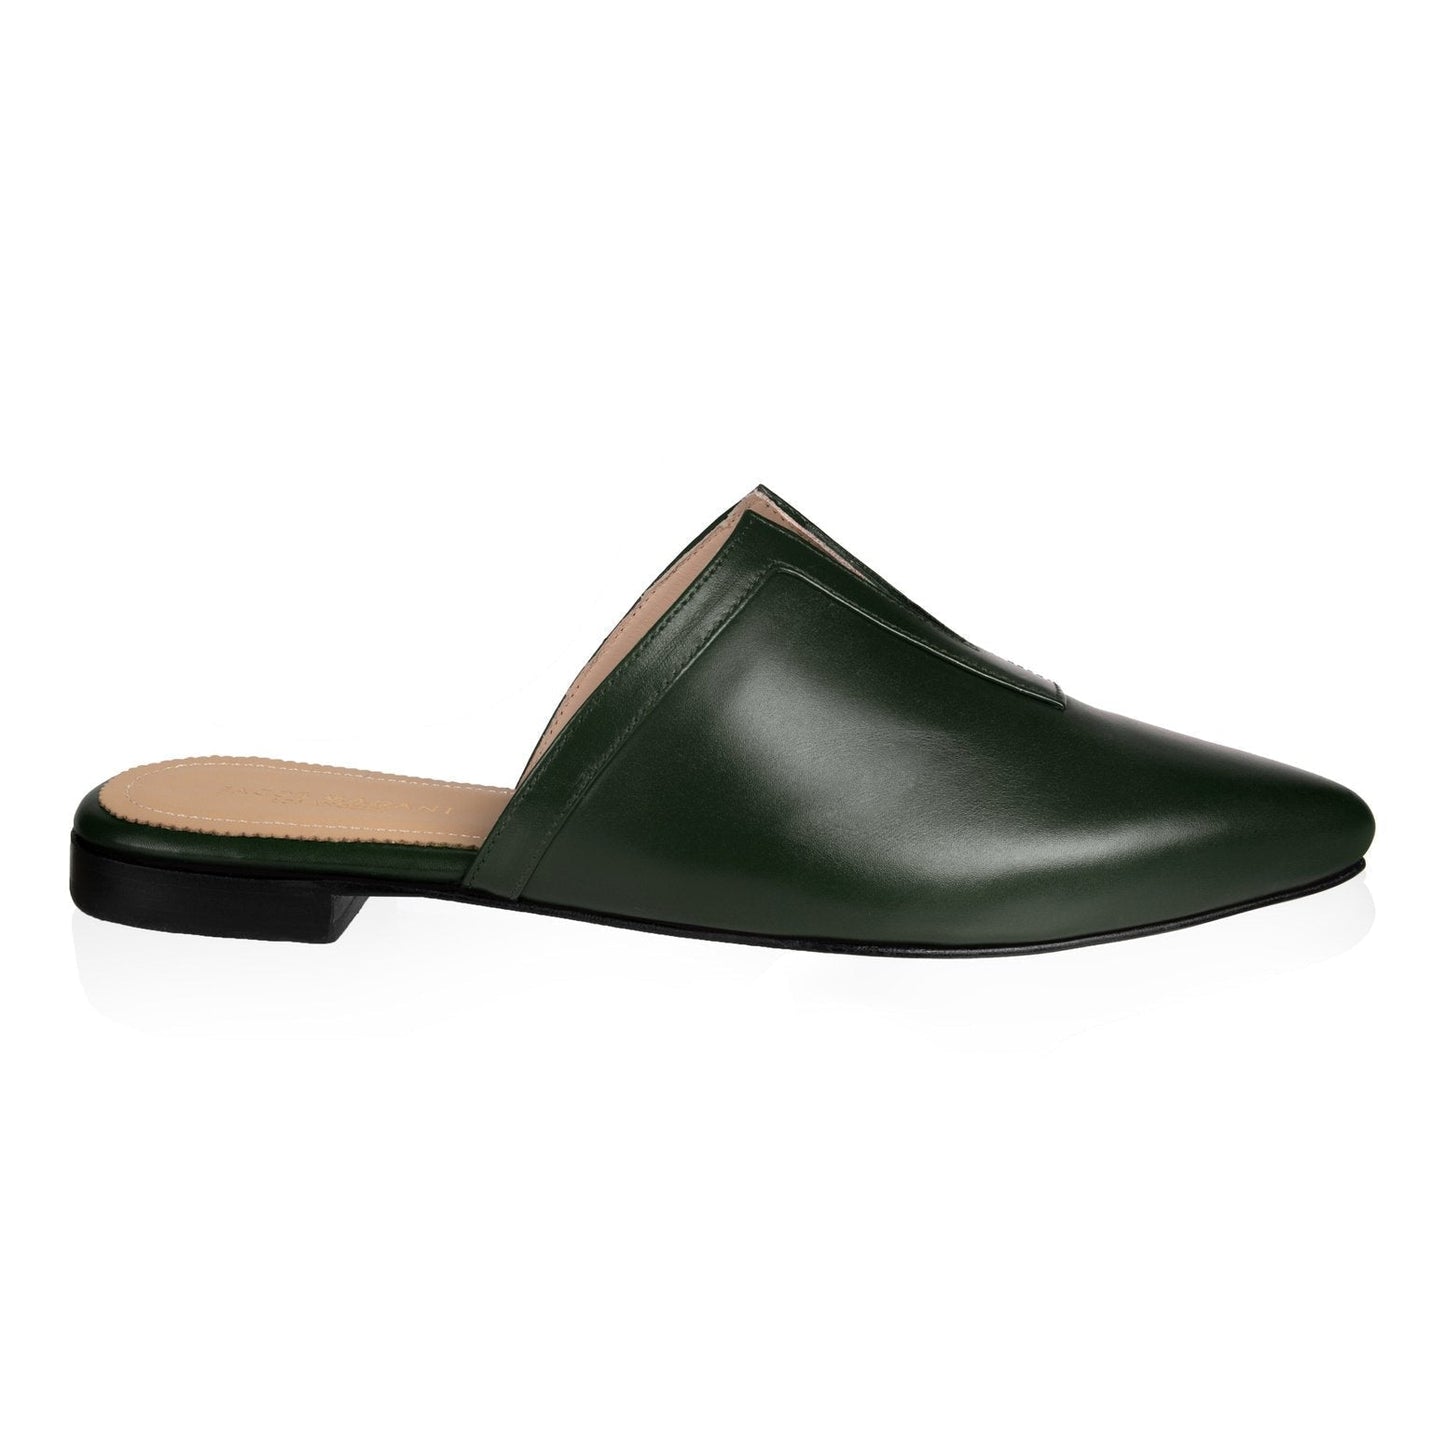 Pointy-toe Flat Mule in Calfskin with Slit